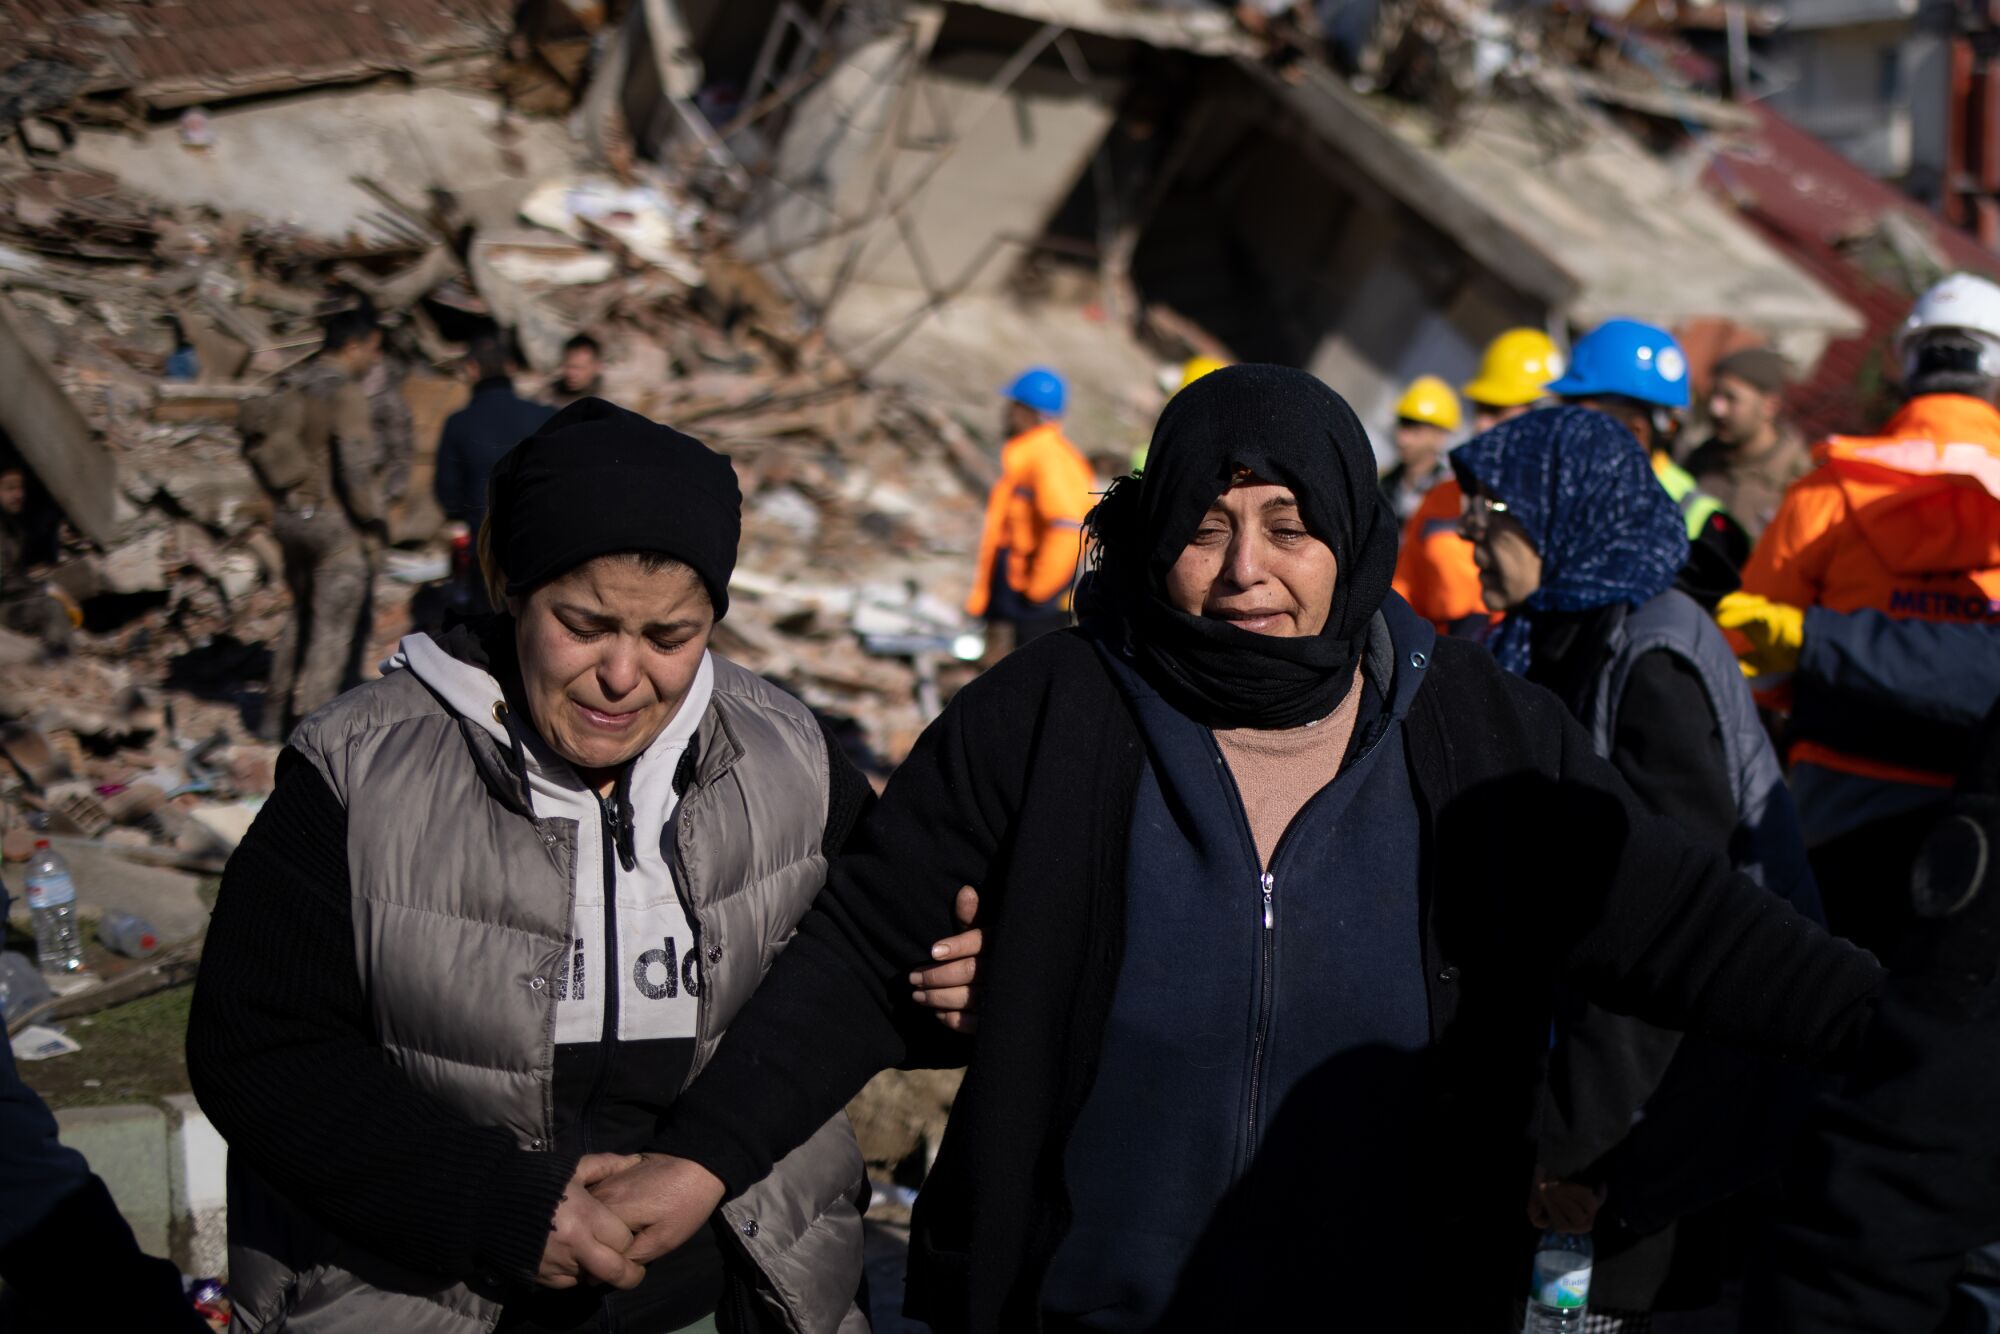 Women try to comfort each other as emergency crews search through rubble.